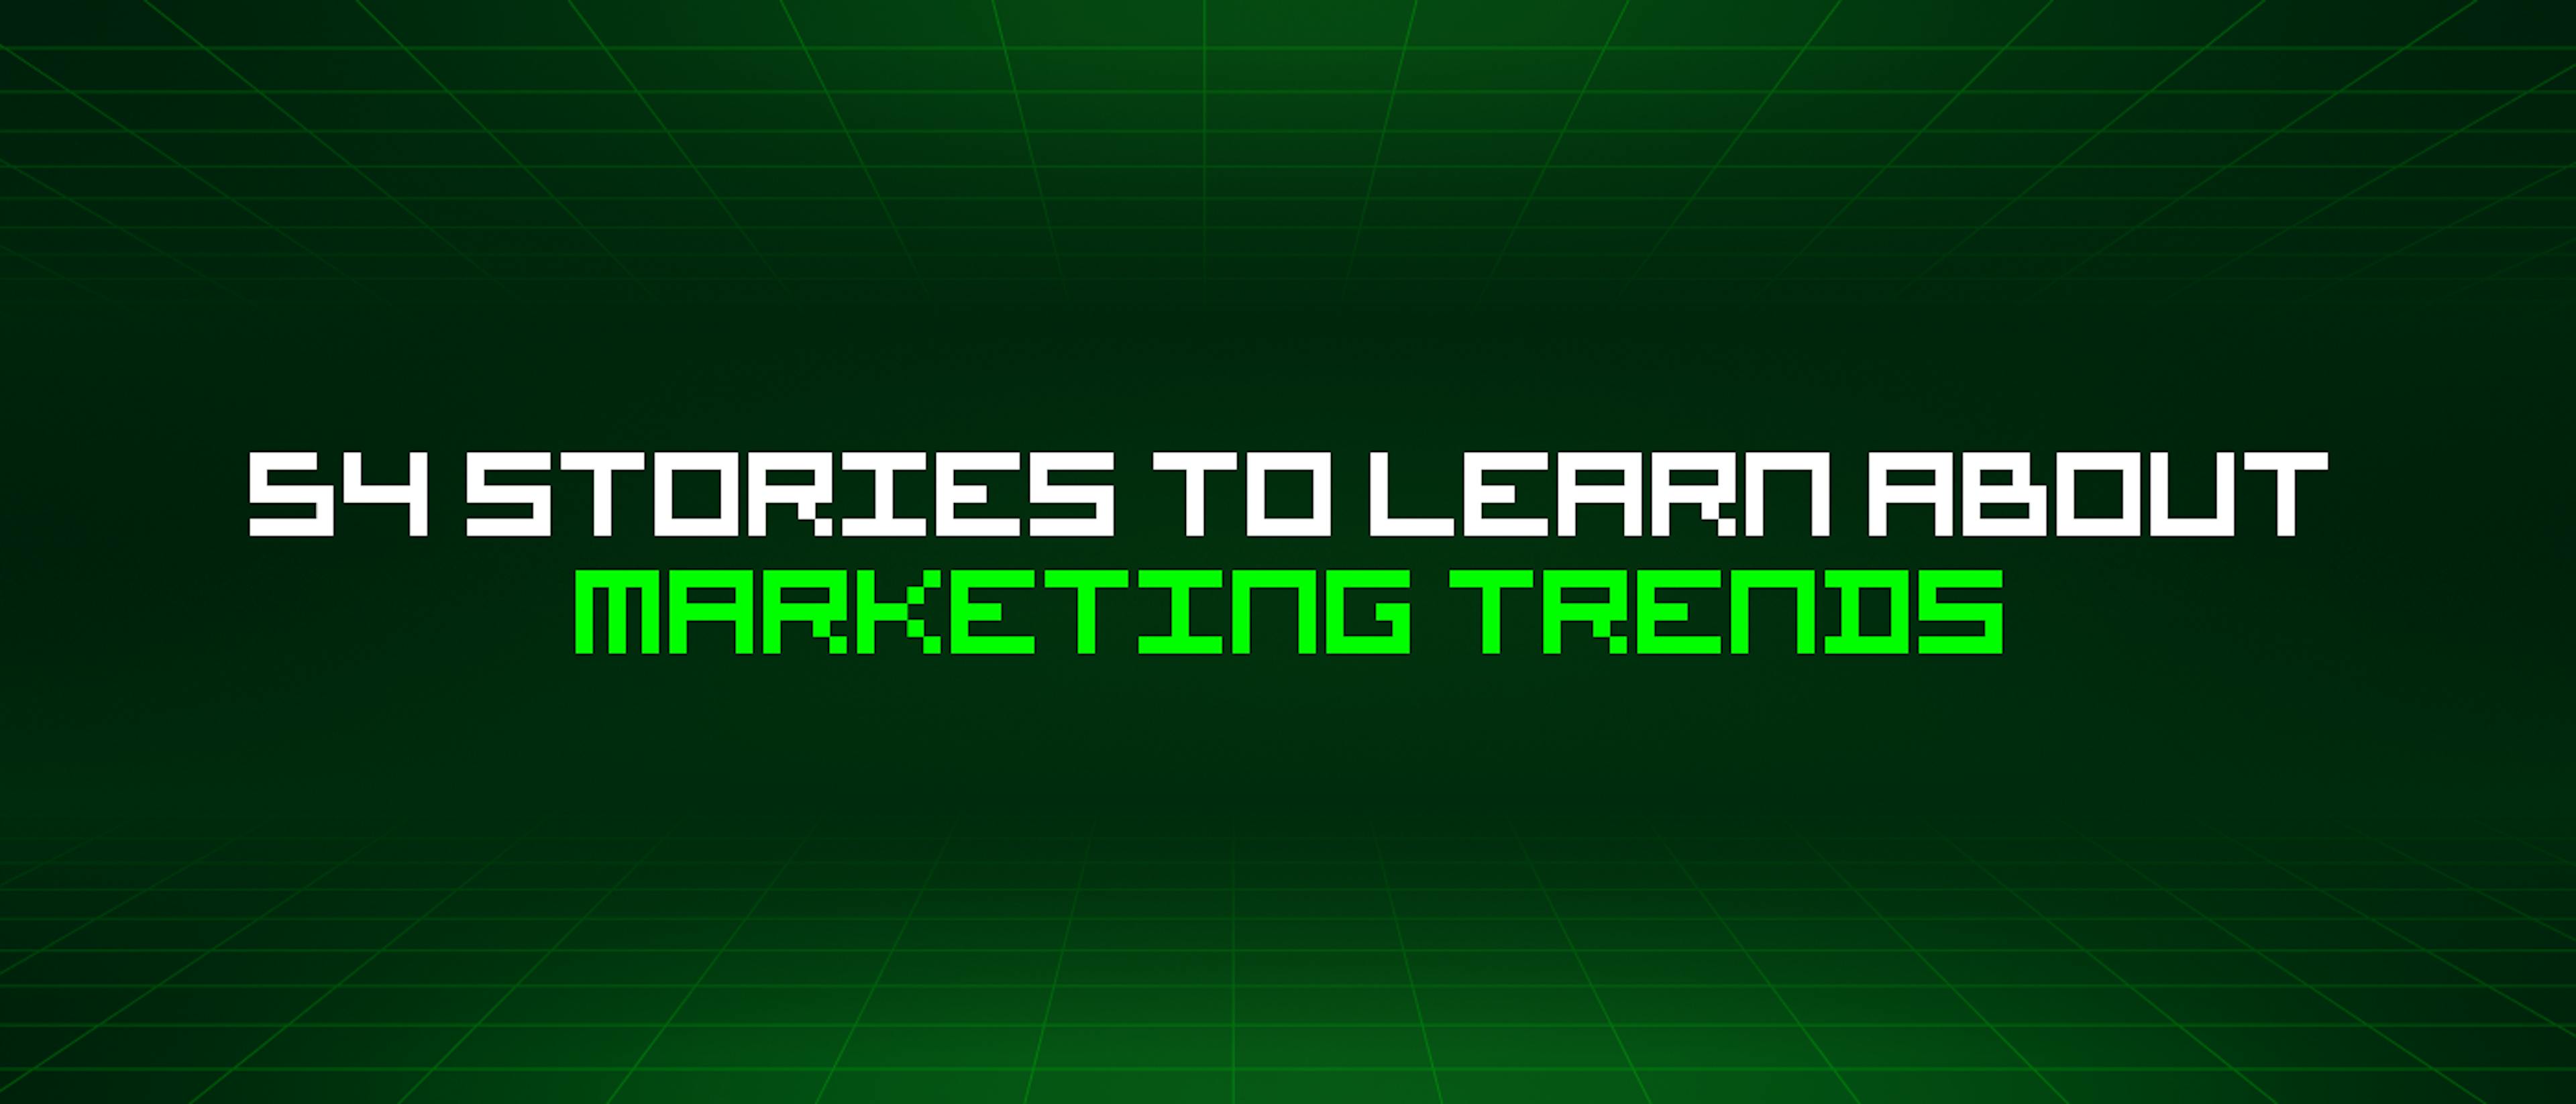 featured image - 54 Stories To Learn About Marketing Trends